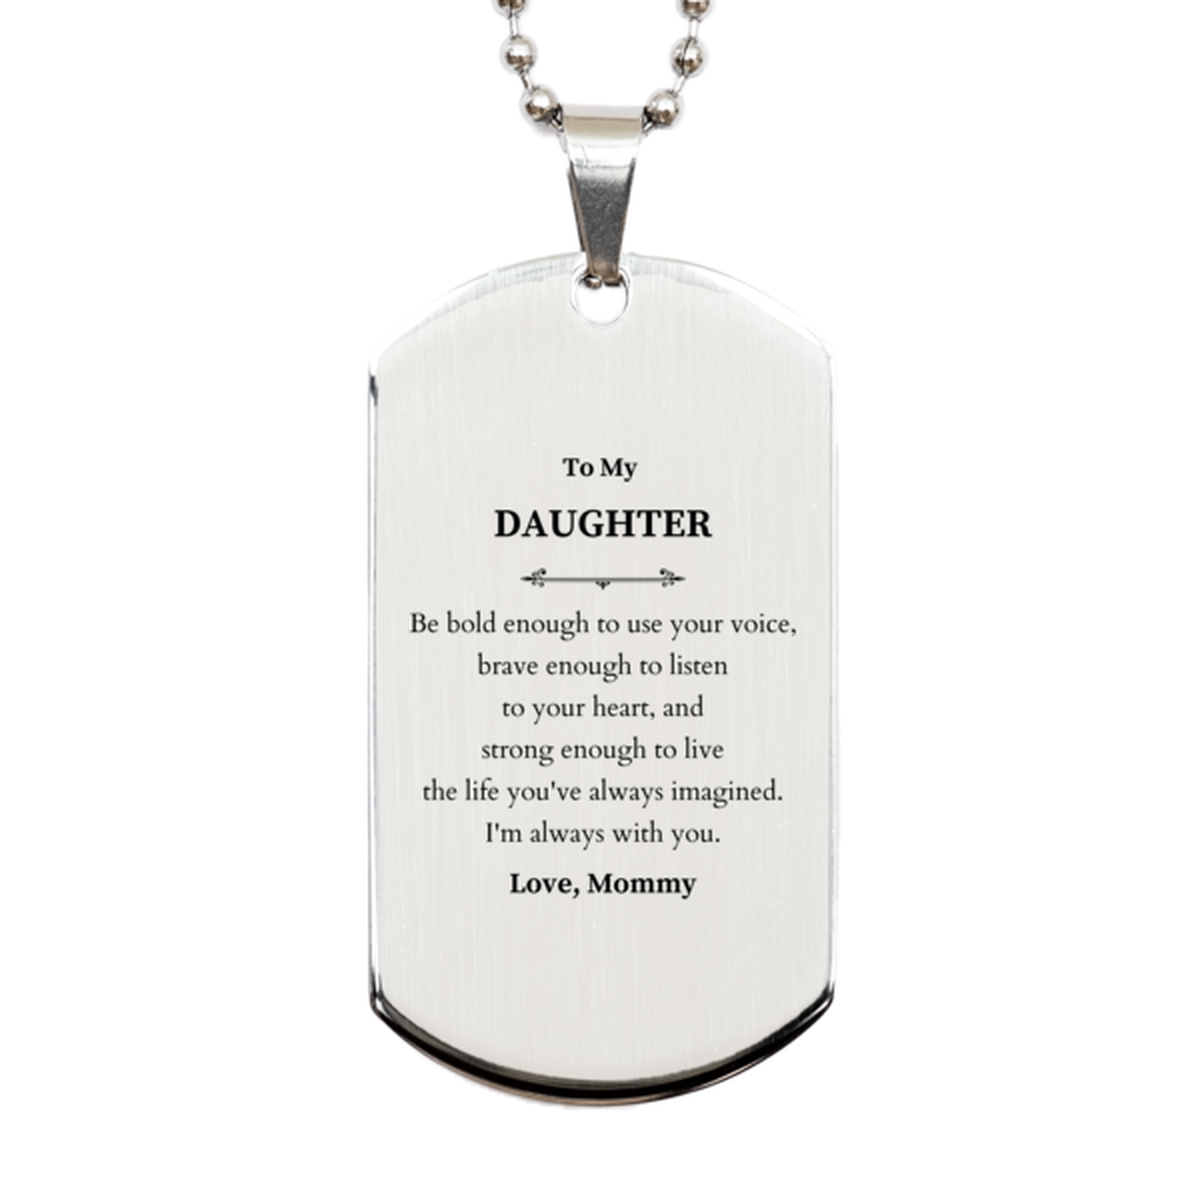 Keepsake Daughter Silver Dog Tag Gift Idea Graduation Christmas Birthday Daughter from Mommy, Daughter Be bold enough to use your voice, brave enough to listen to your heart. Love, Mommy